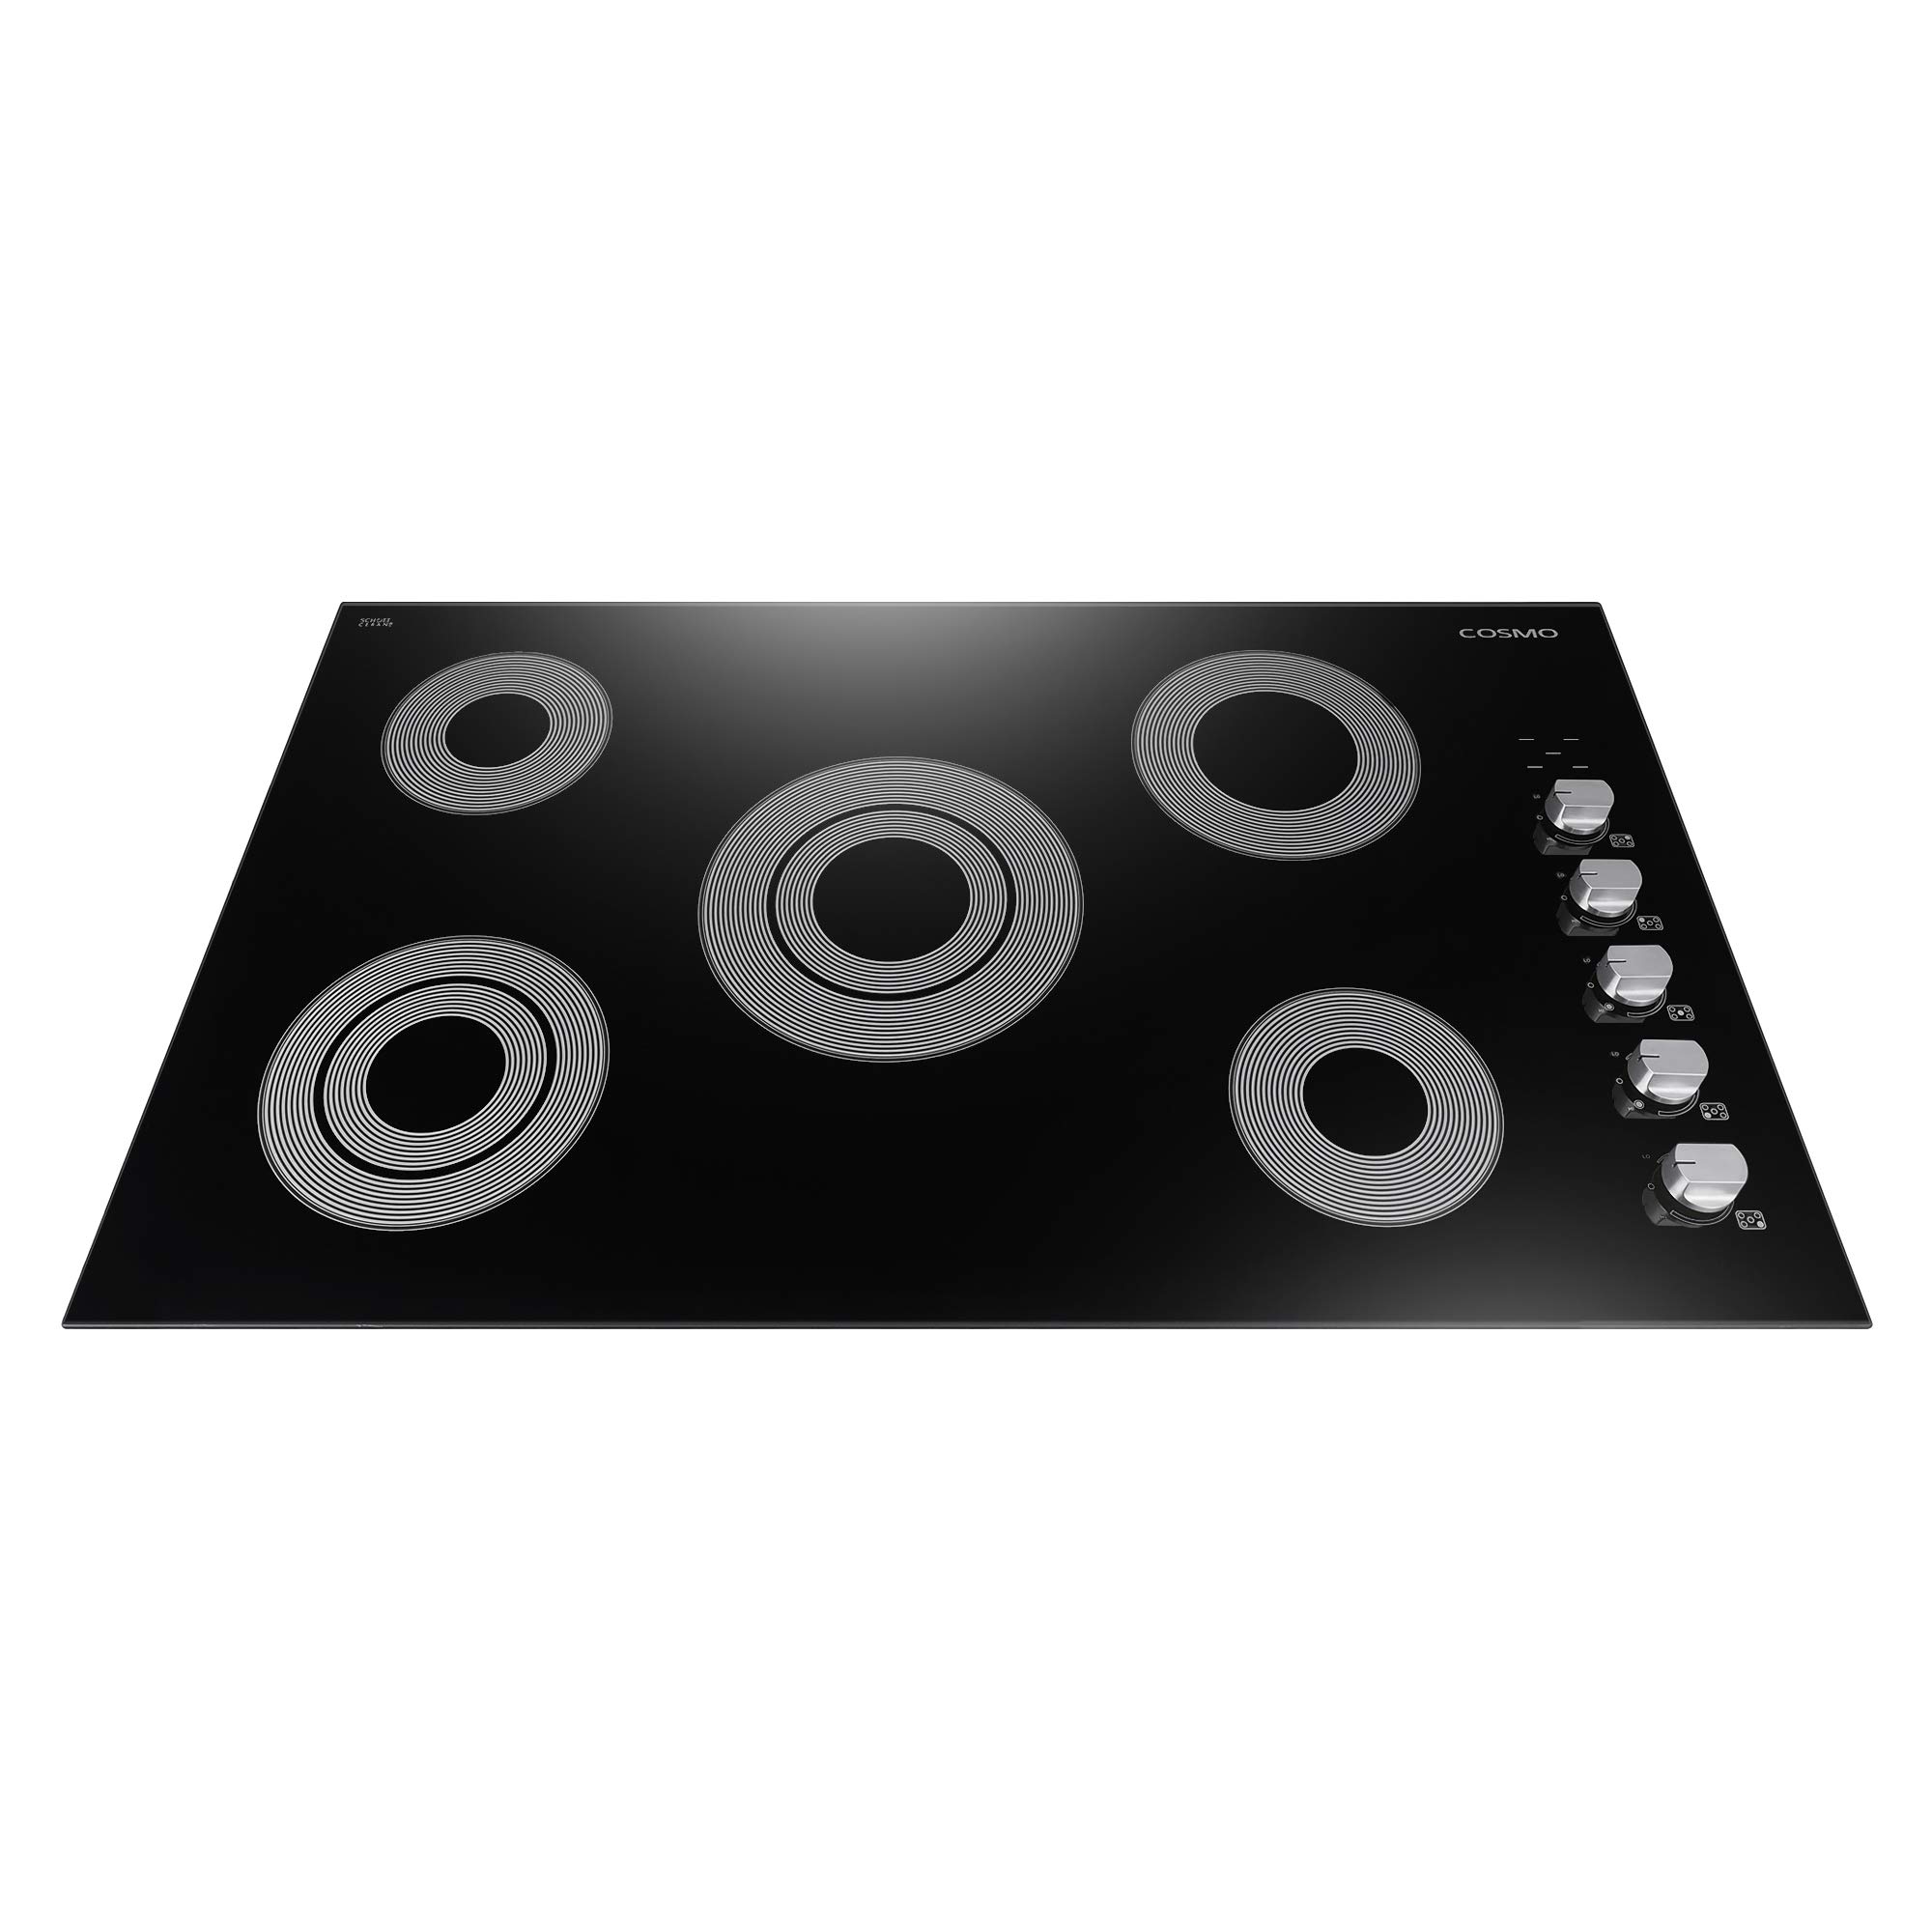 COSMO COS-365ECC Electric Ceramic Glass Cooktop with 4 Burners, Dual Zone Element, Hot Surface Indicator Light and Control Knobs, 36 inches, Black